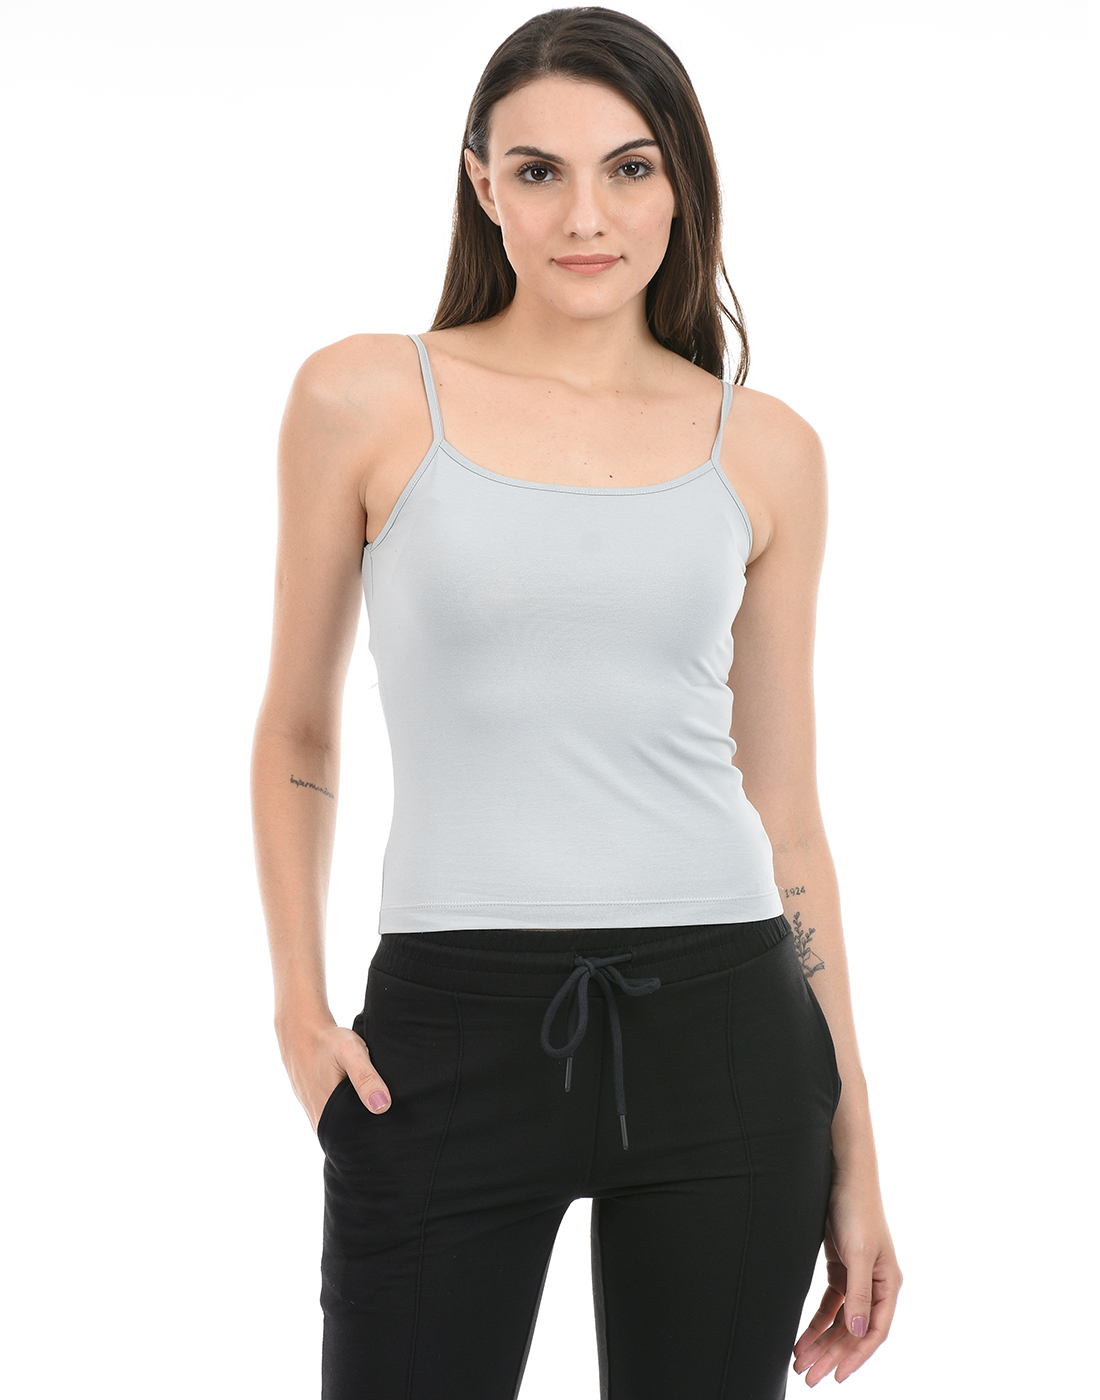 ONEWAY Regular Fit Sleeveless Solid Camisole Top for Women|Cotton Blend|Stretchable|Multipurpose|Casual Western Wear